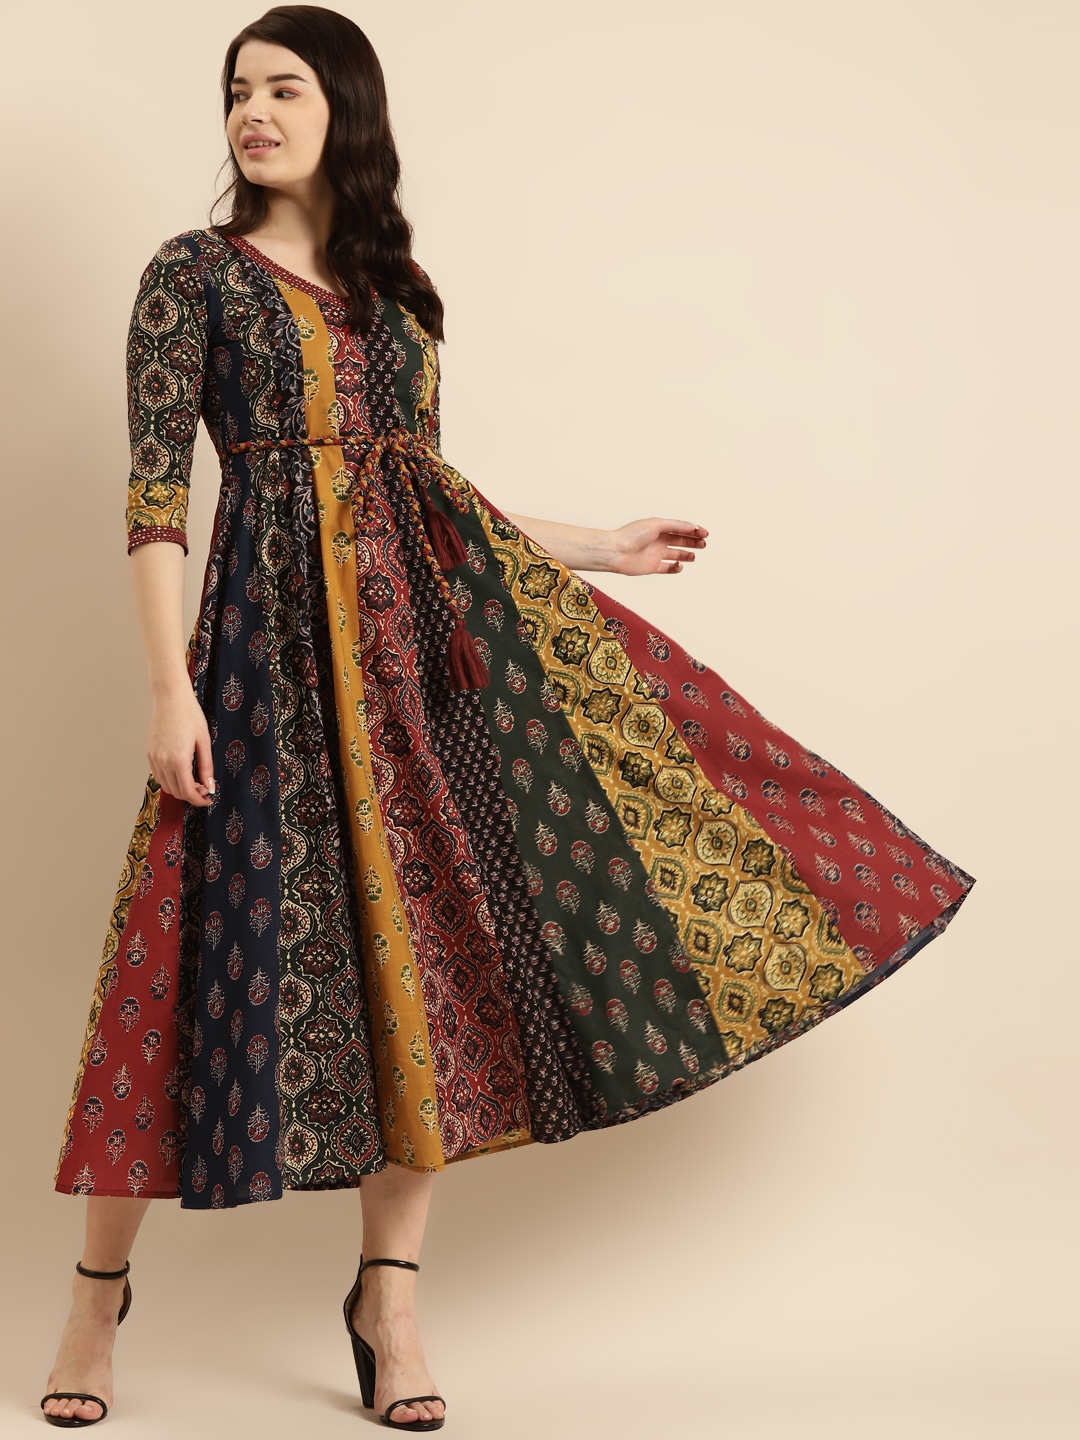 Maxi dress- Floral ethnic maxi dress- Top 14 dresses from Myntra